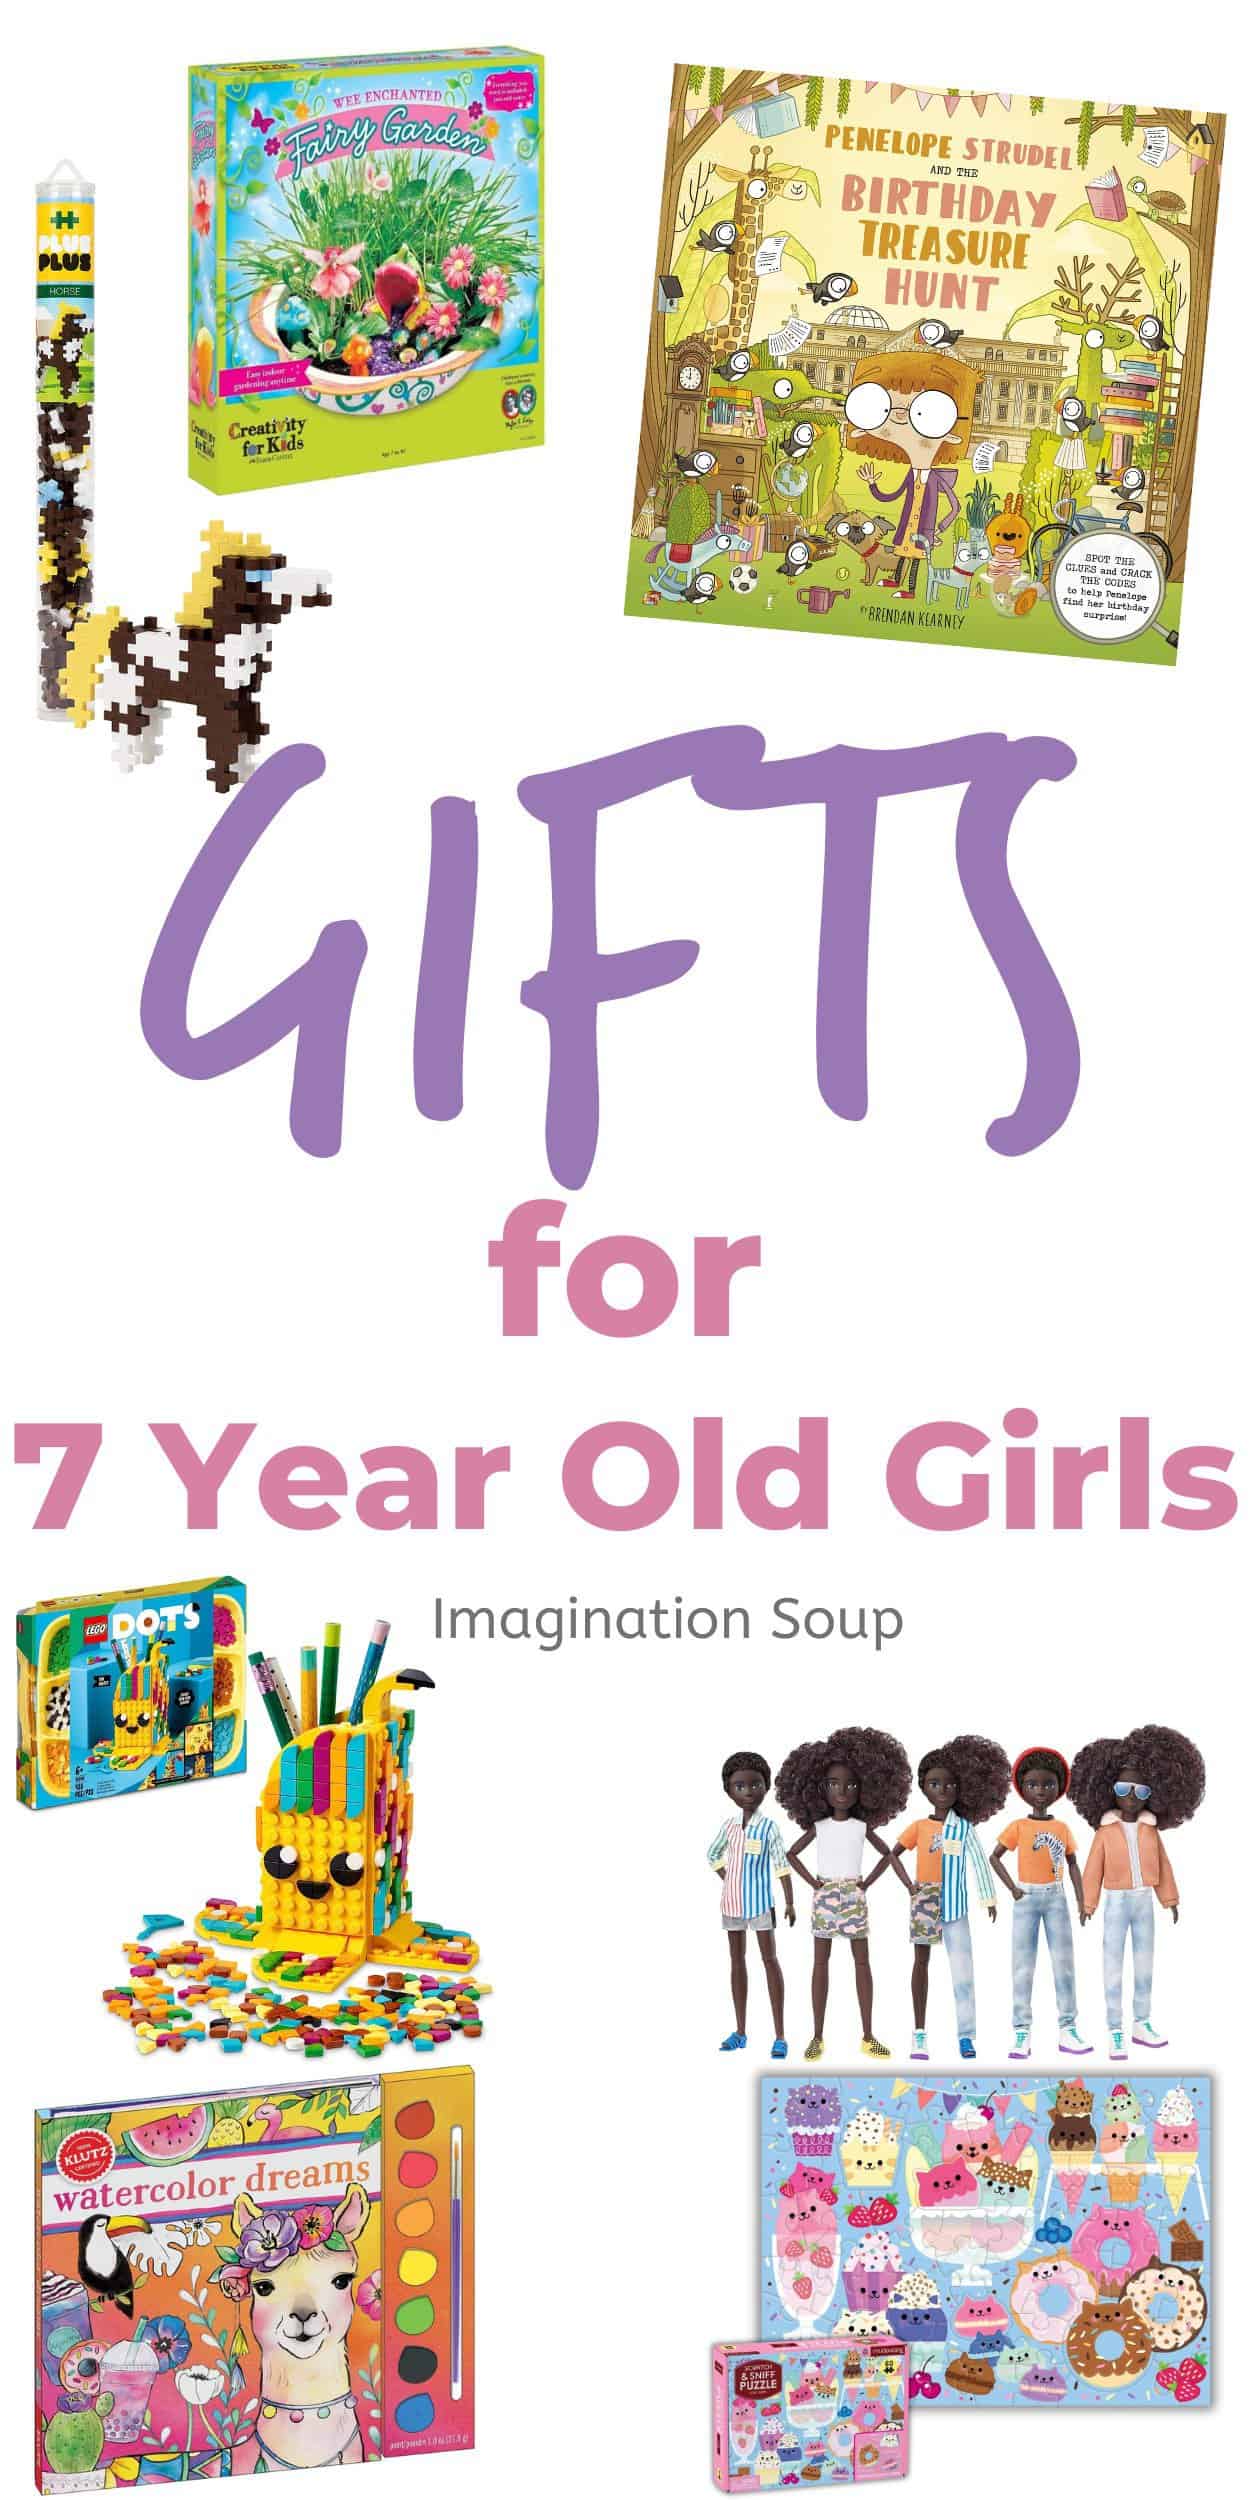 I Am 7 And Magical Birthday Gift For 7 Year Old Girl: Awesome Coloring Book  For Little Girl 7 year old girl birthday Idea by Magicala Colorang